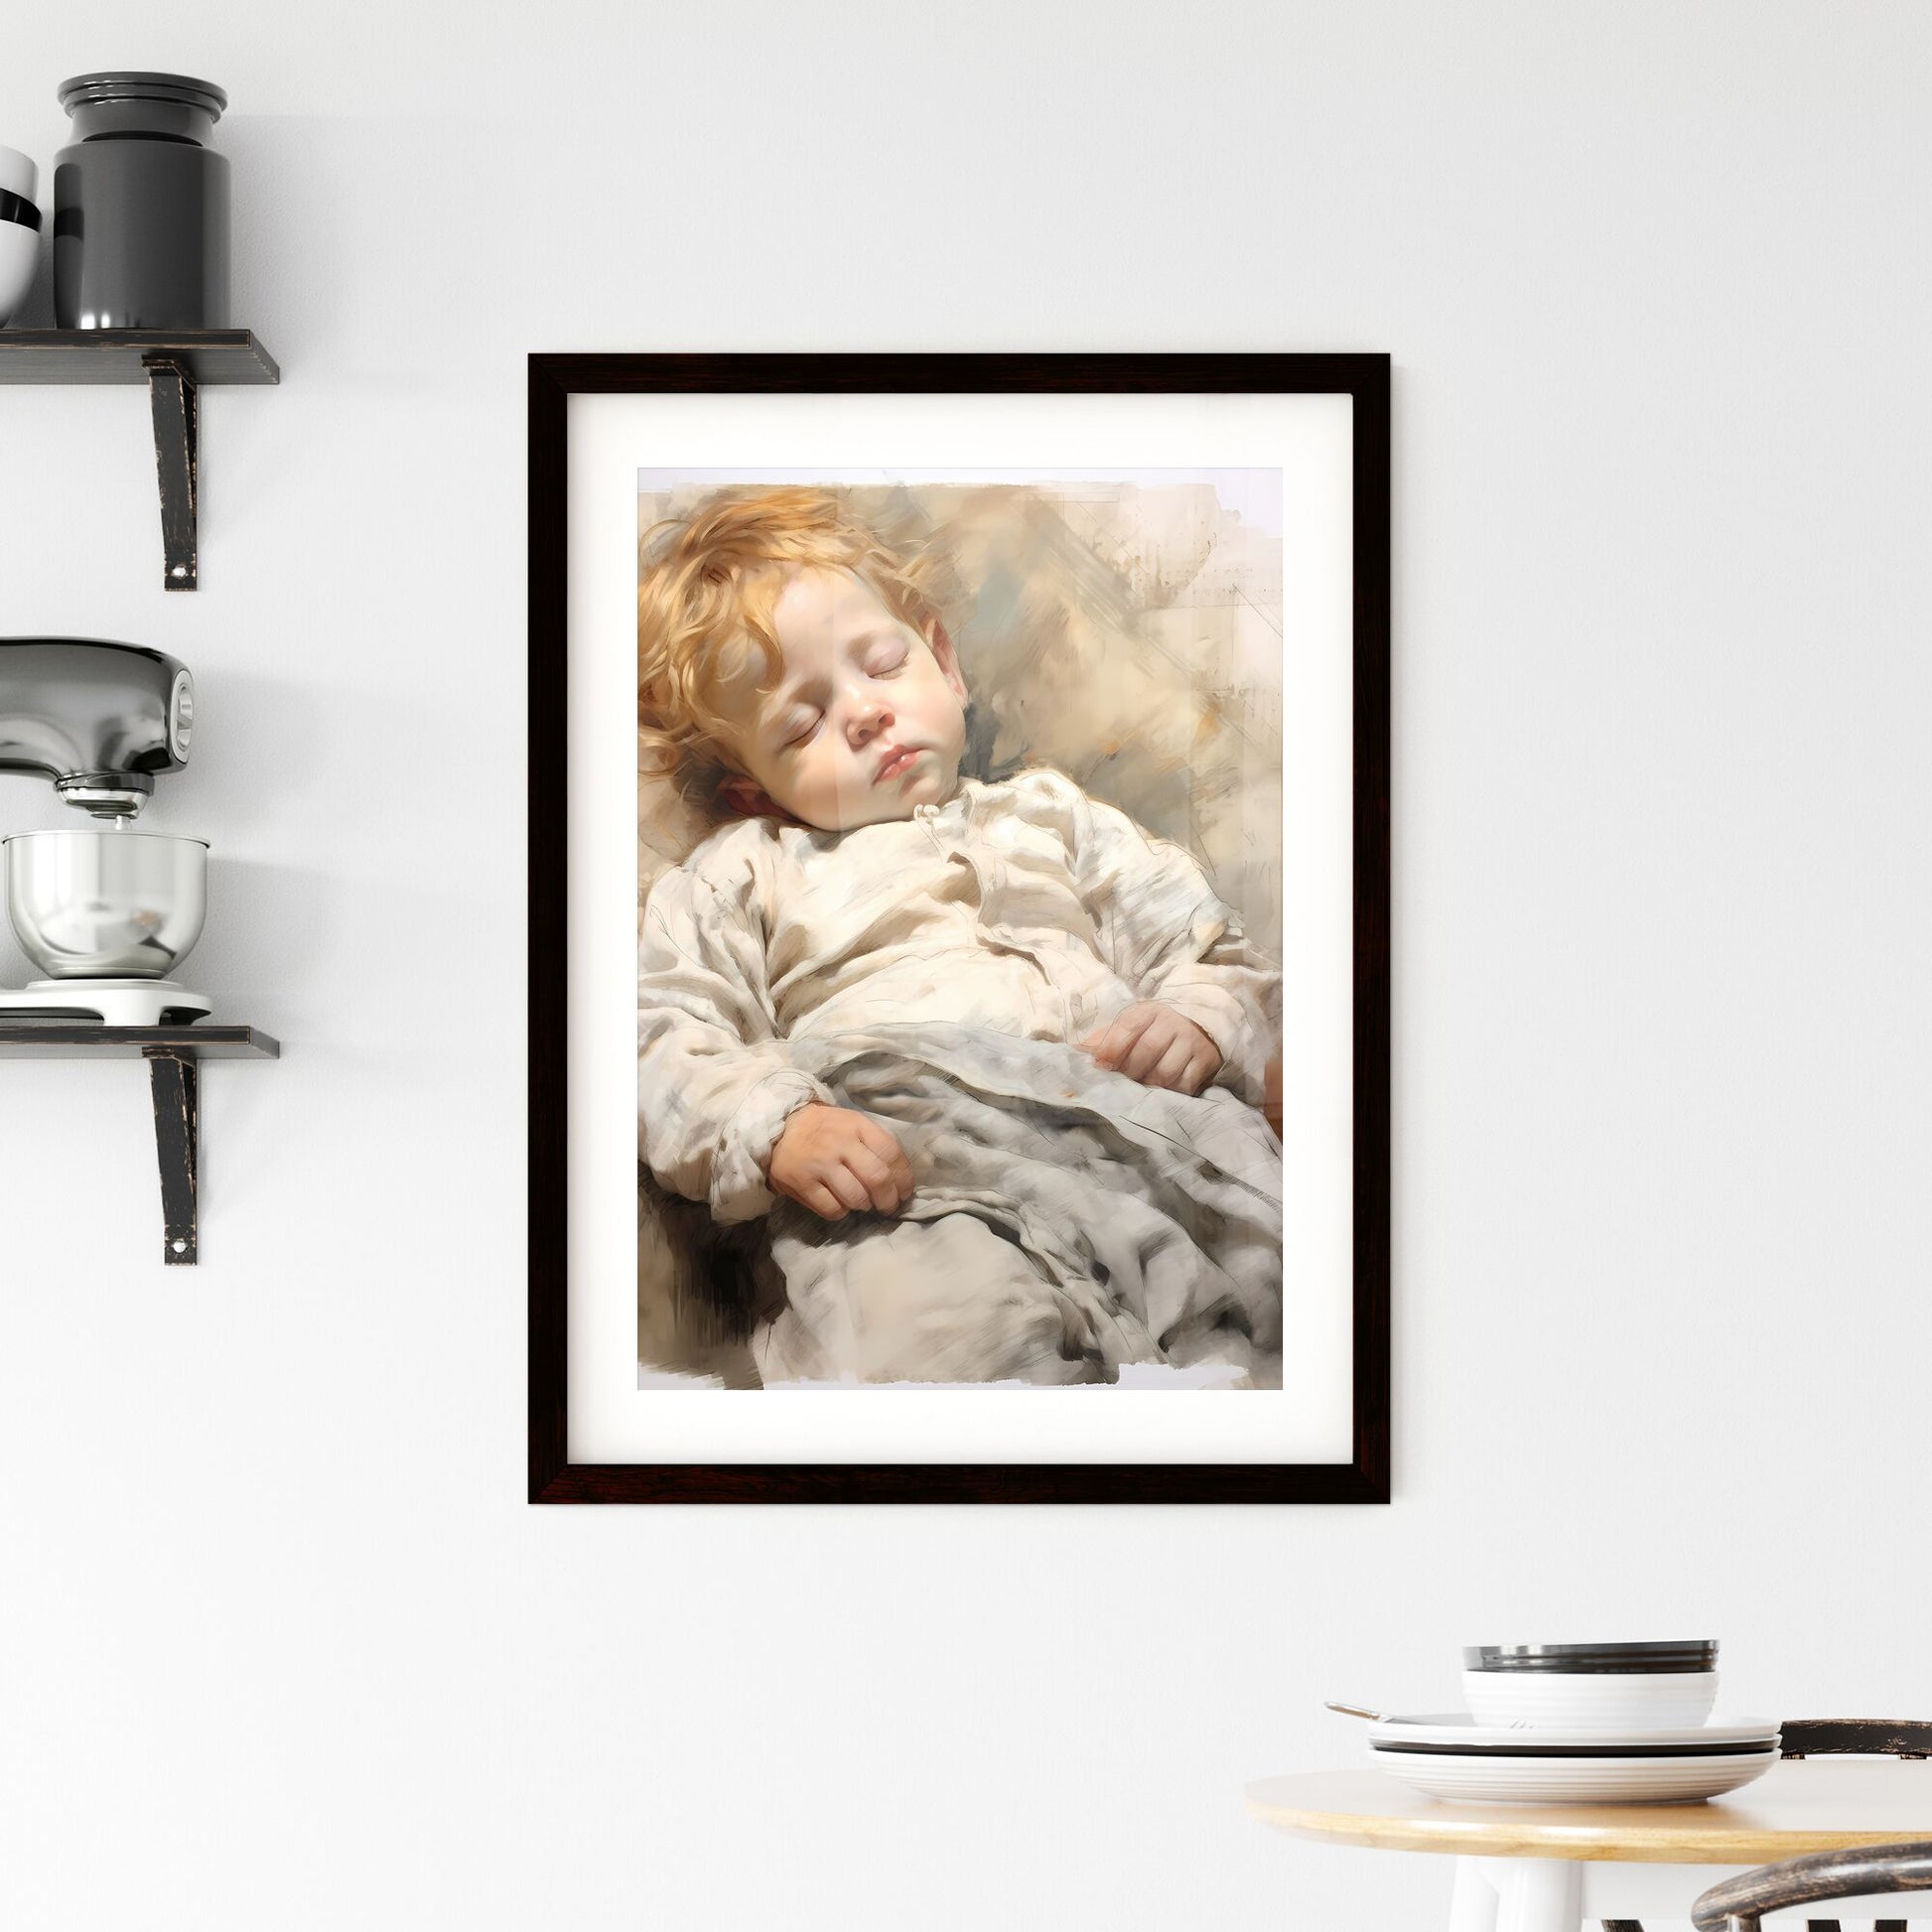 A Poster of lovely baby sleeping - A Child Sleeping In A White Robe Default Title